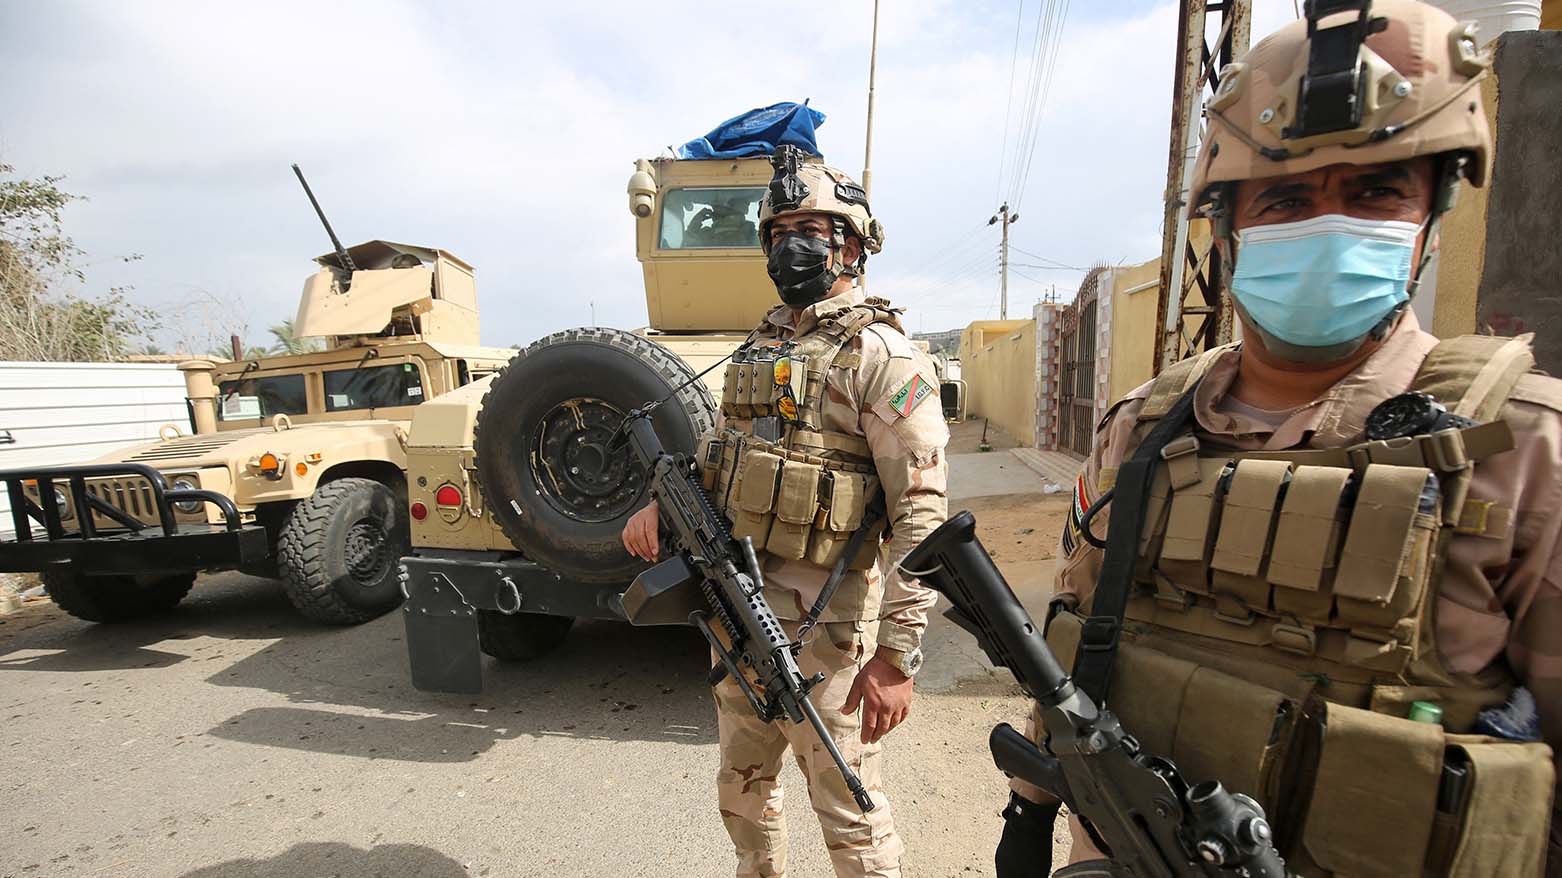 Iraqi forces search the area in Tarmiyah, north of Baghdad, following clashes with Islamic State group fighters, Feb. 20, 2021. (Photo: Ahmad al-Rubaye/AFP)